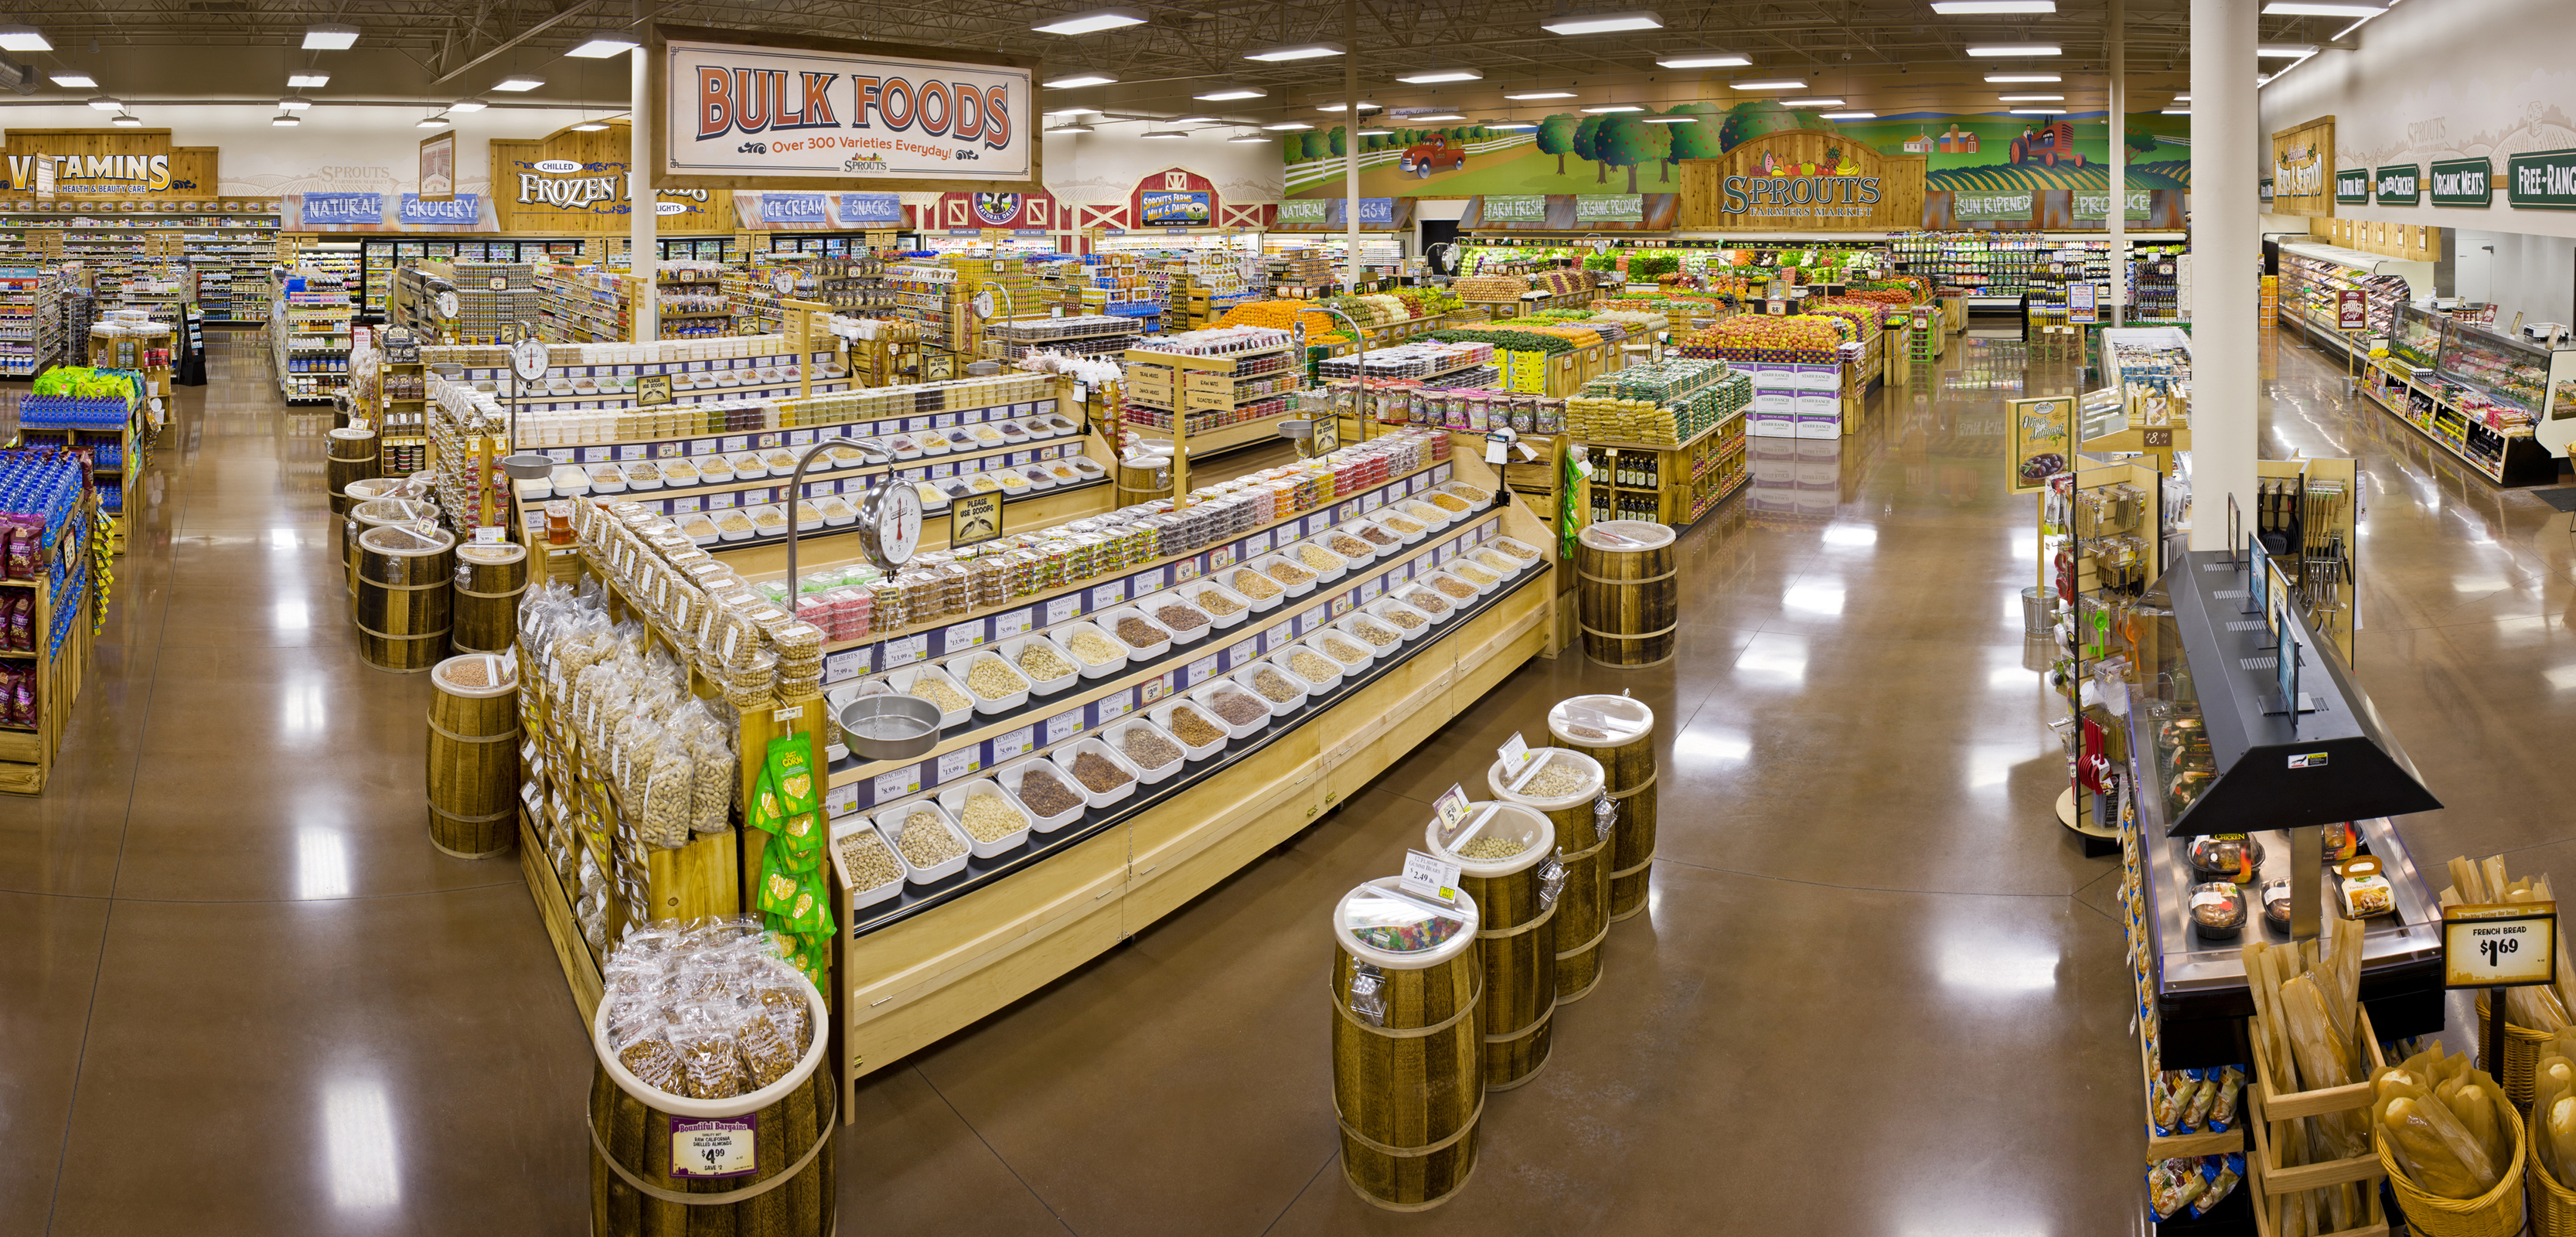 Sprouts Farmers Markets image